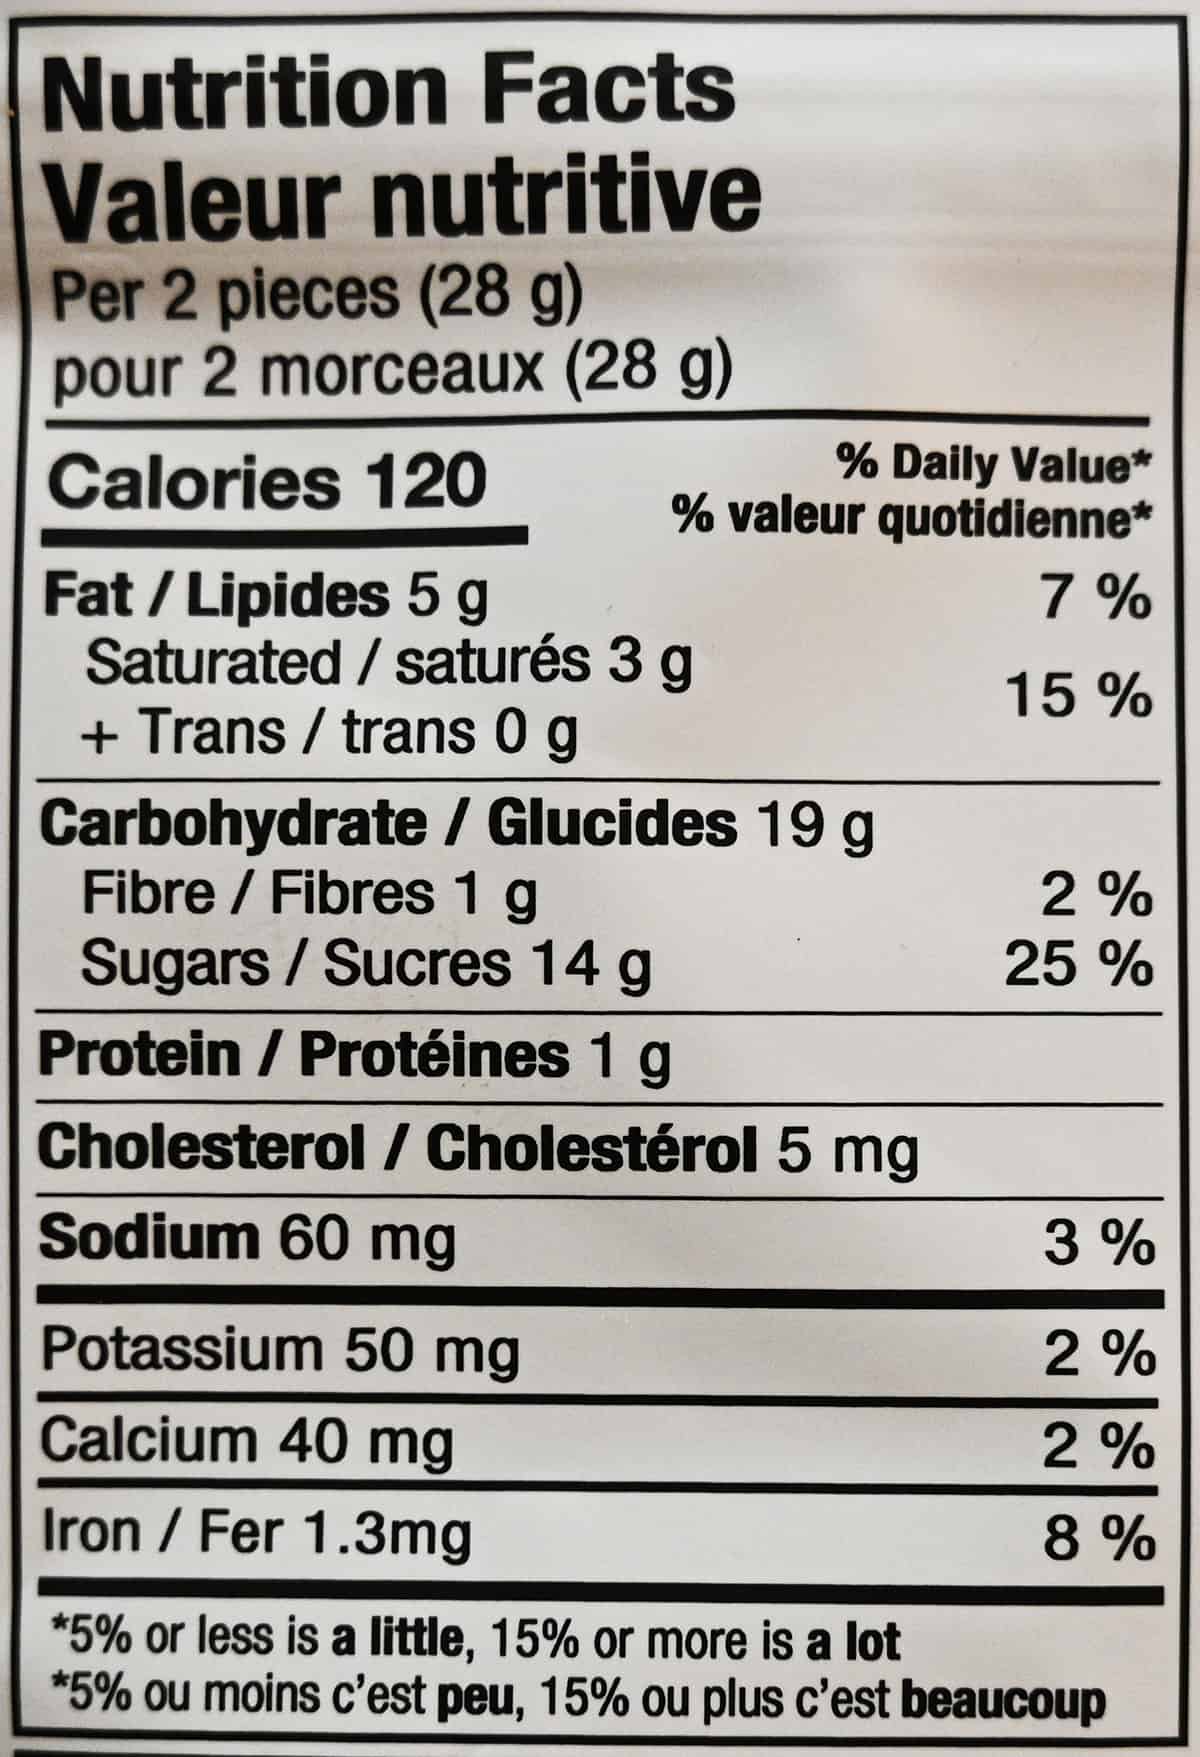 Image of the Caramel S'mores Snappers nutrition facts from the back of the bag.